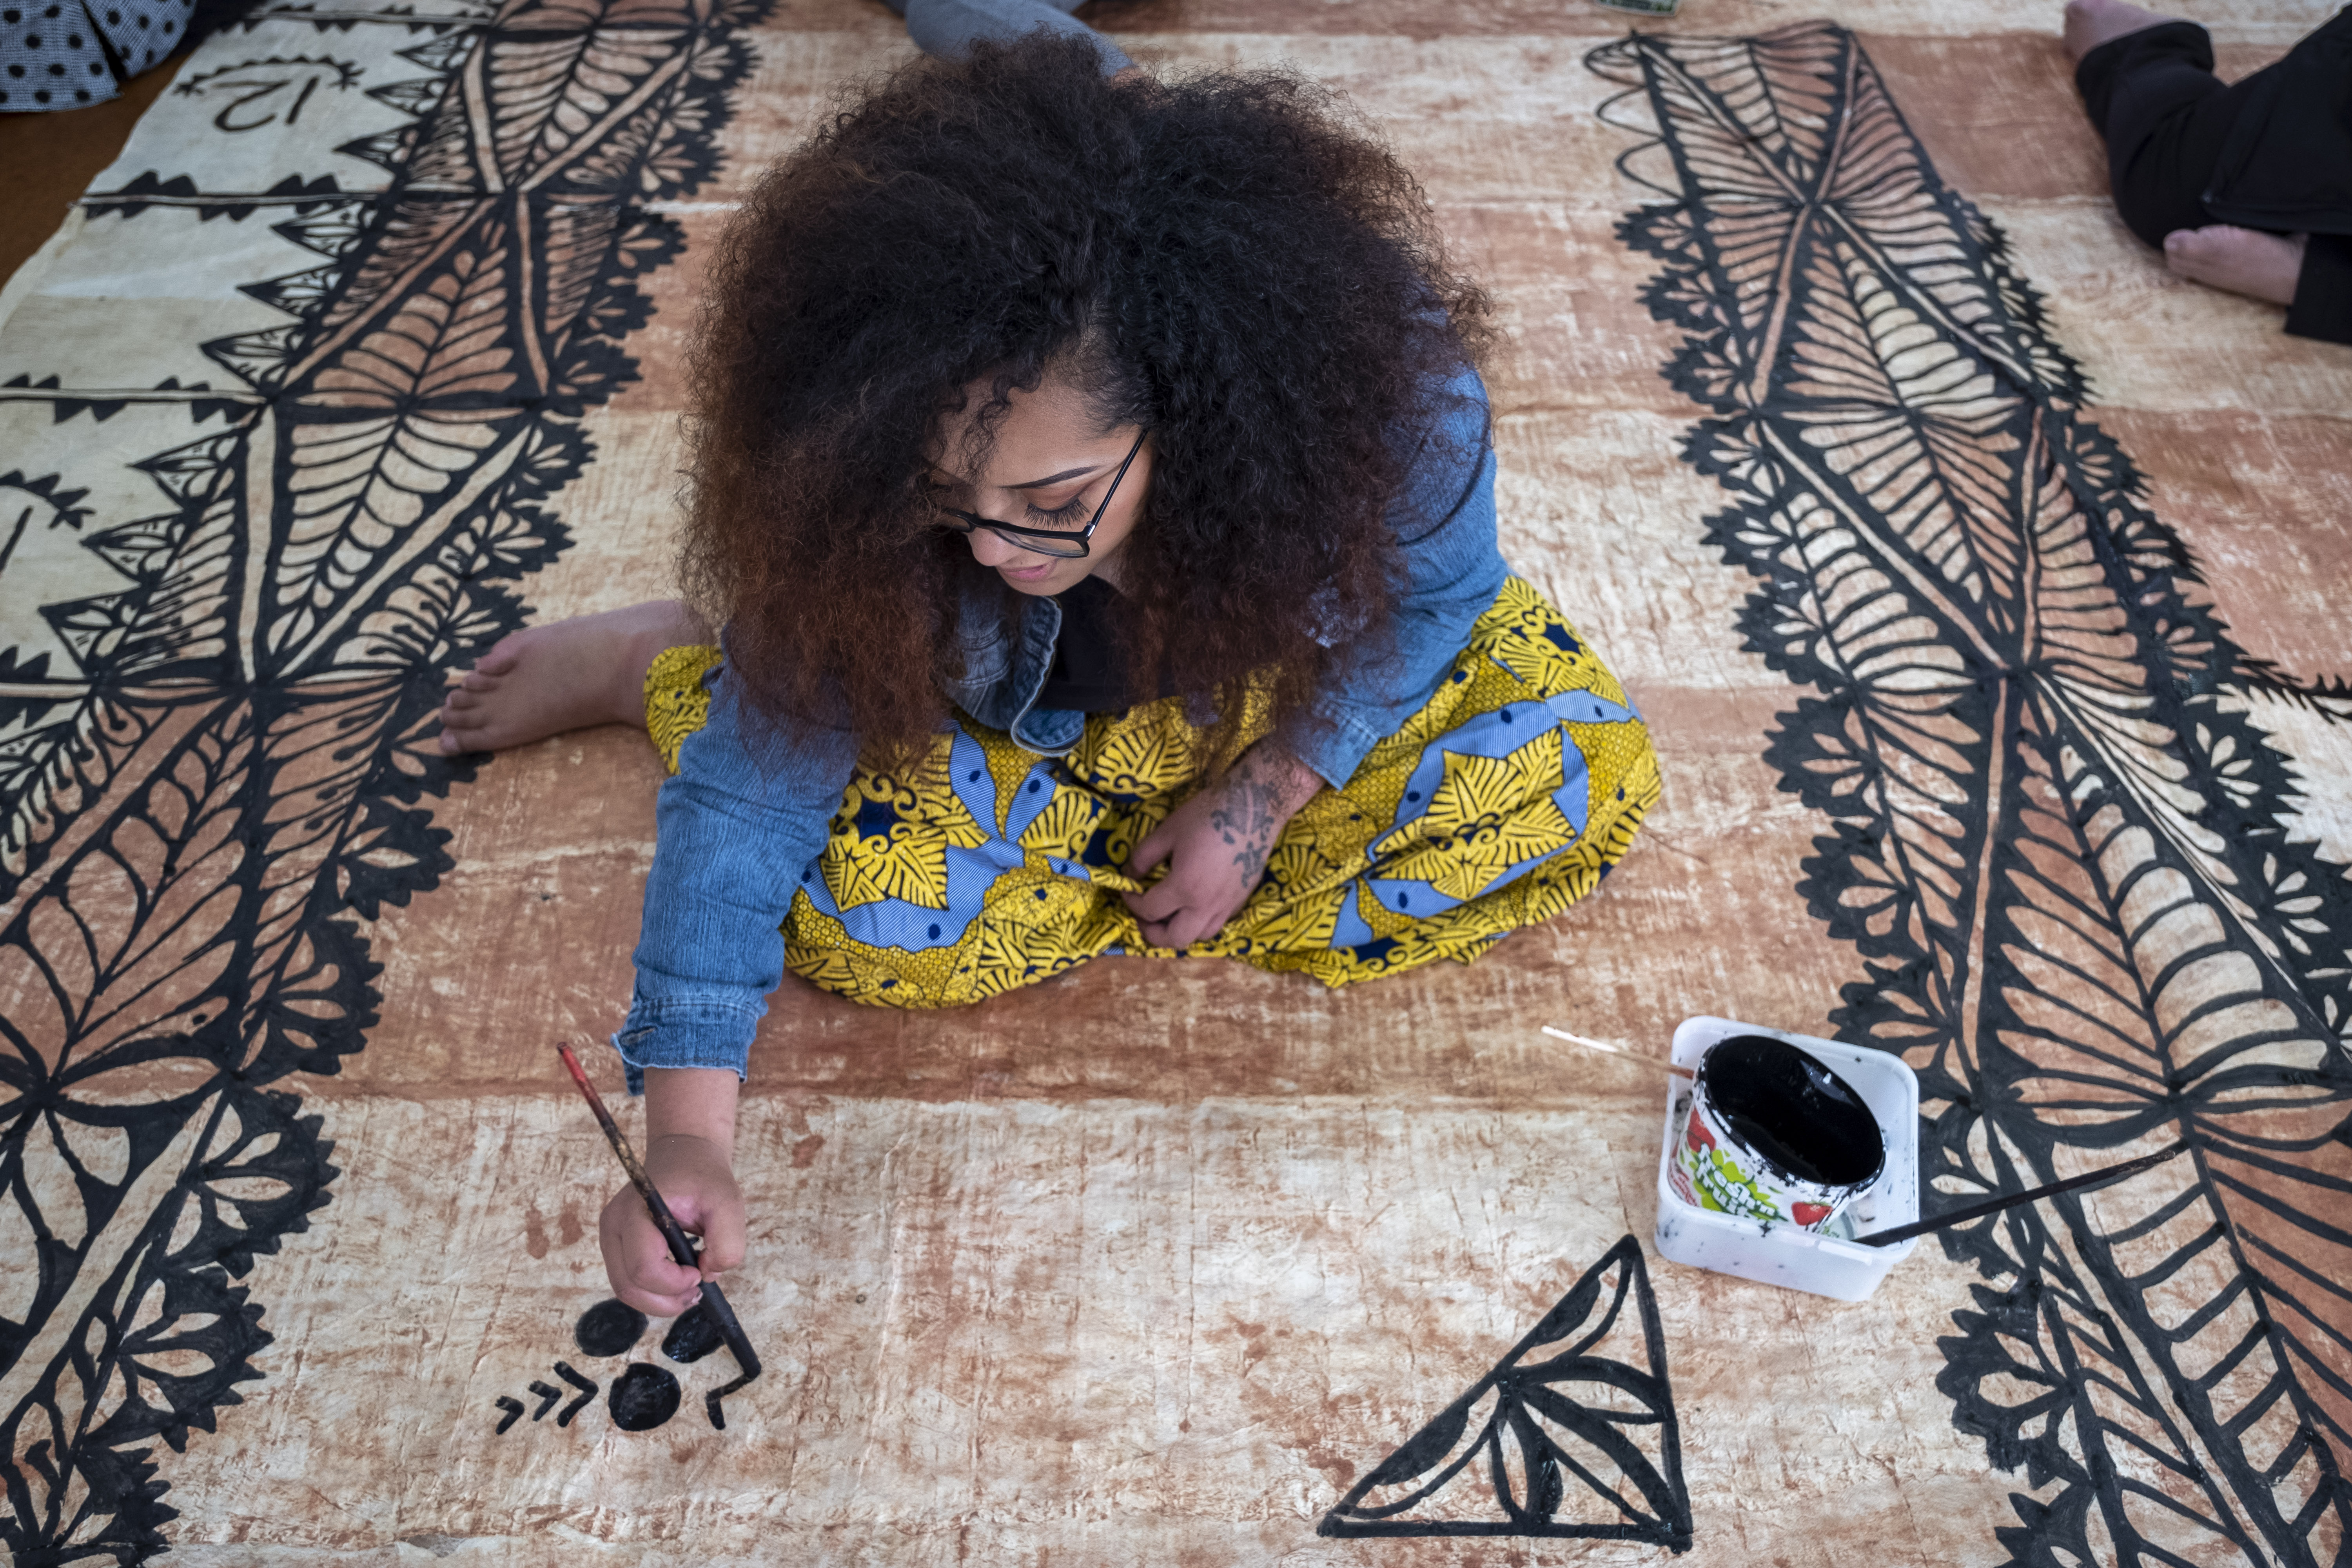 A woman painting black ink on a tapa cloth on the floor.